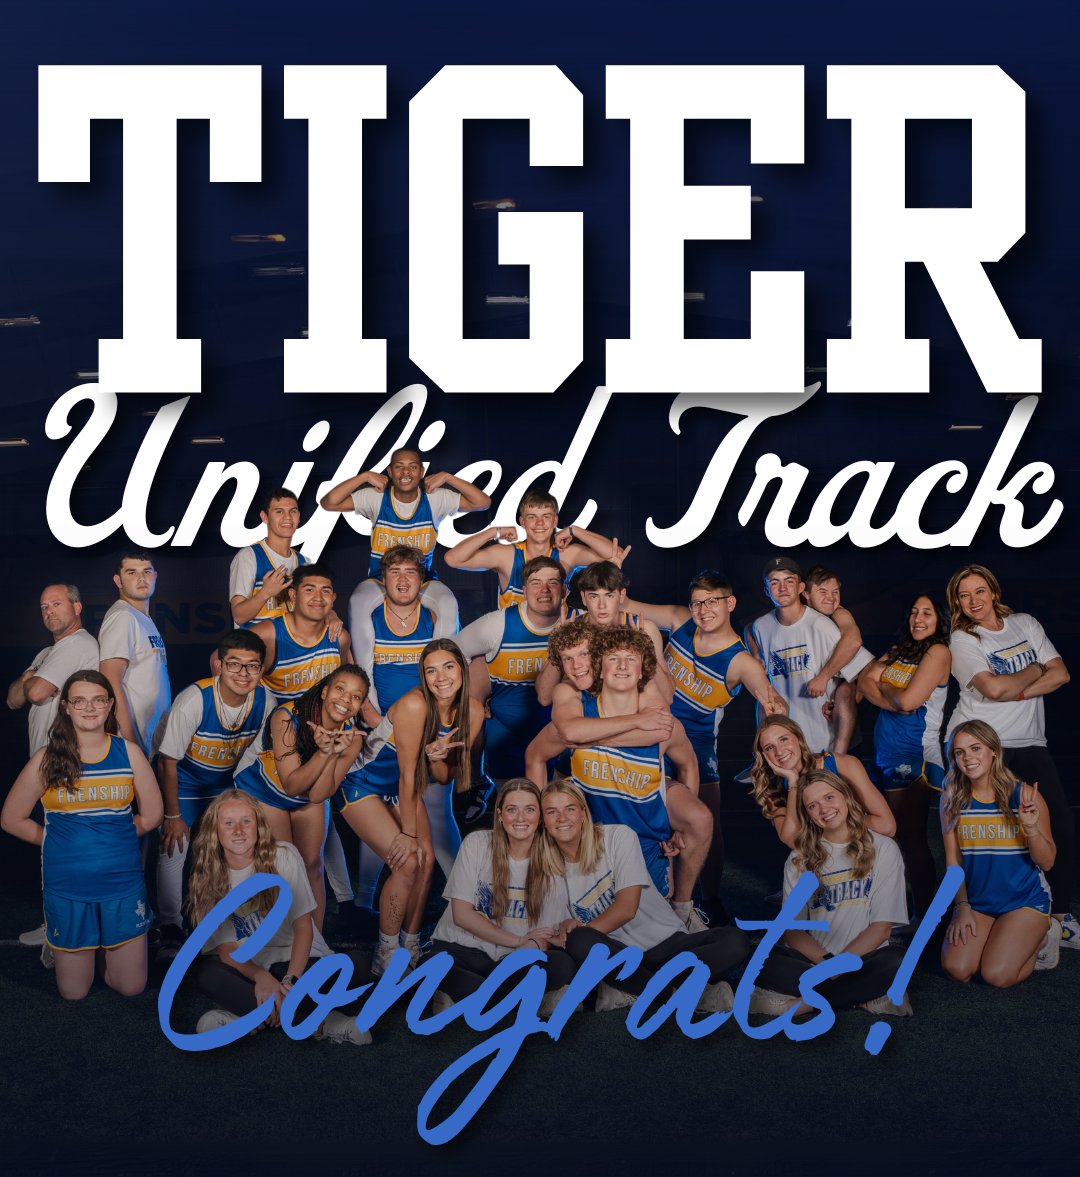 Congratulations to Frenship Unified Track Team for placing 3rd at the State Unified Track Meet!🥳👏 Throughout the season these Tigers competed with pride and integrity! We are so proud of them!🎉 For the full list of State Results, CLICK HERE ➡️ frenship.net/apps/news/arti…